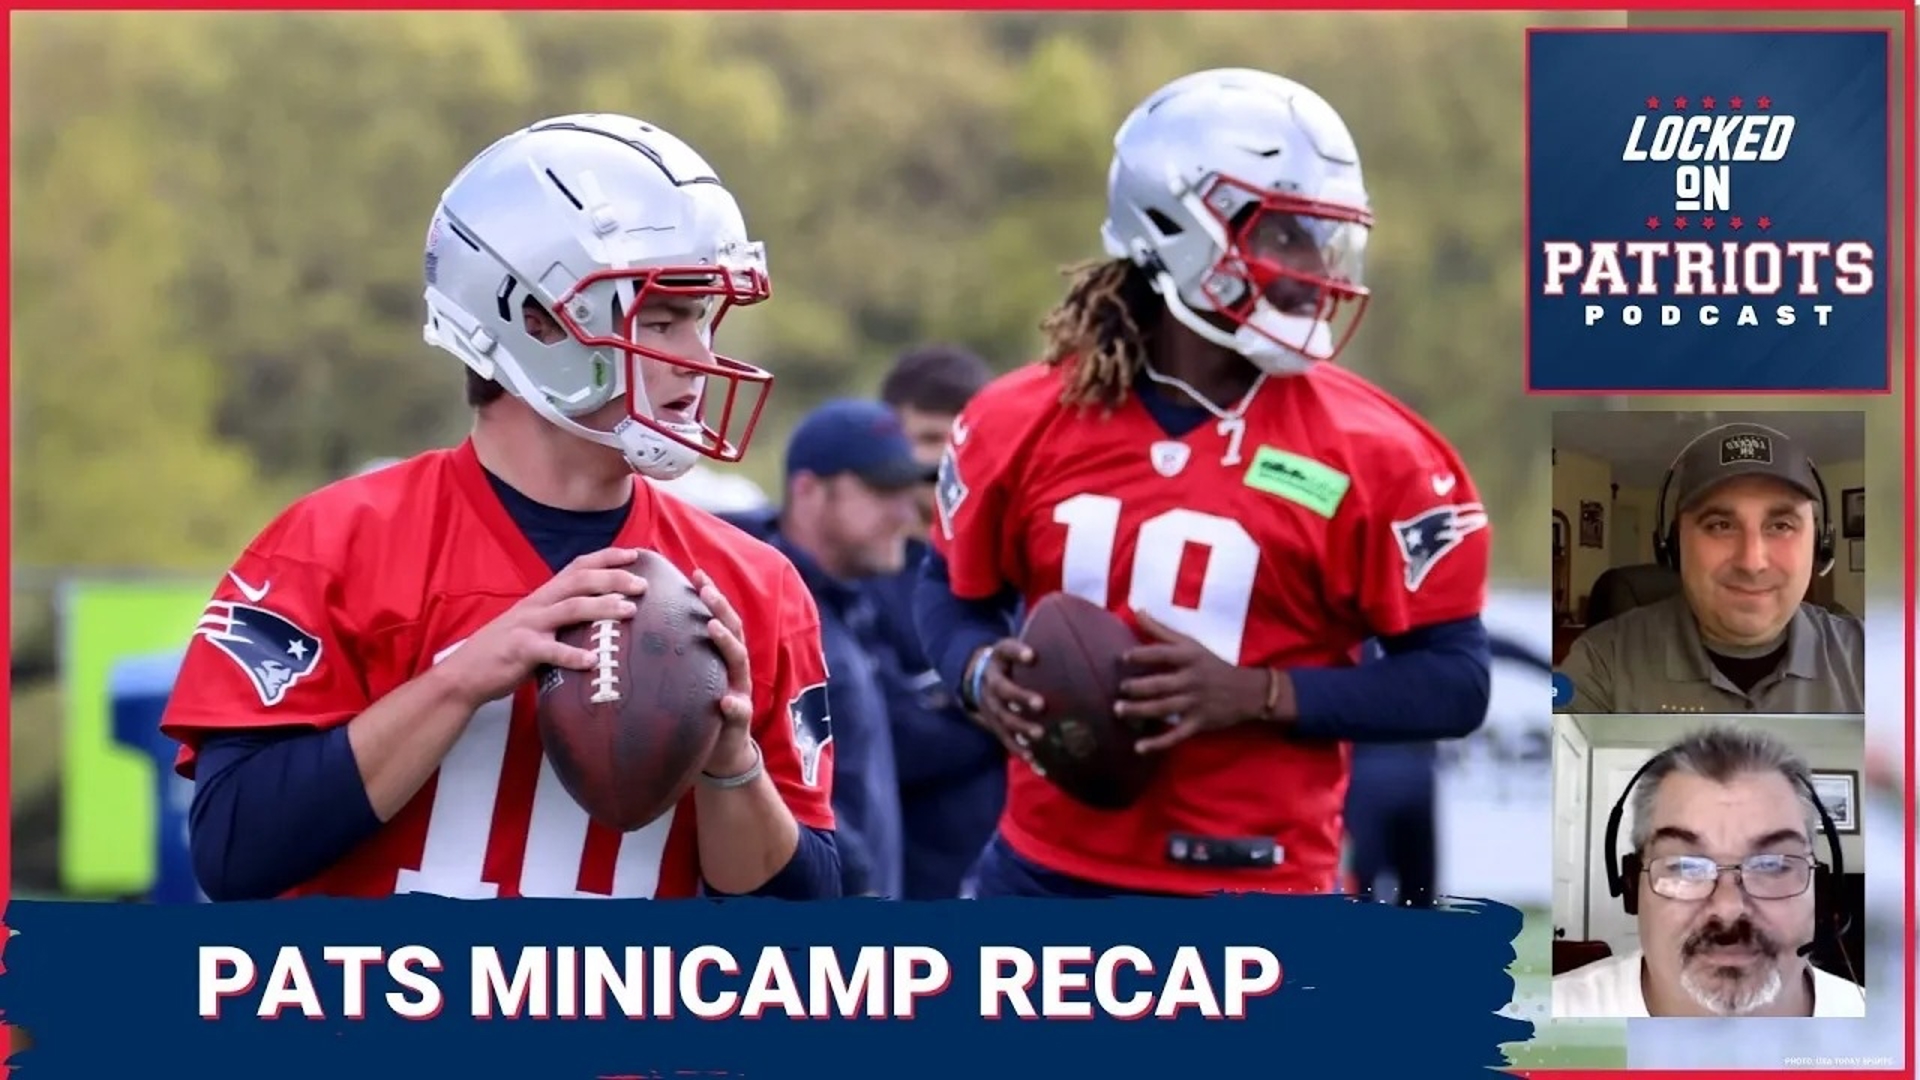 The New England Patriots returned to the practice fields adjacent to Gillette Stadium on Monday, as they opened the final phase of their offseason workout program.